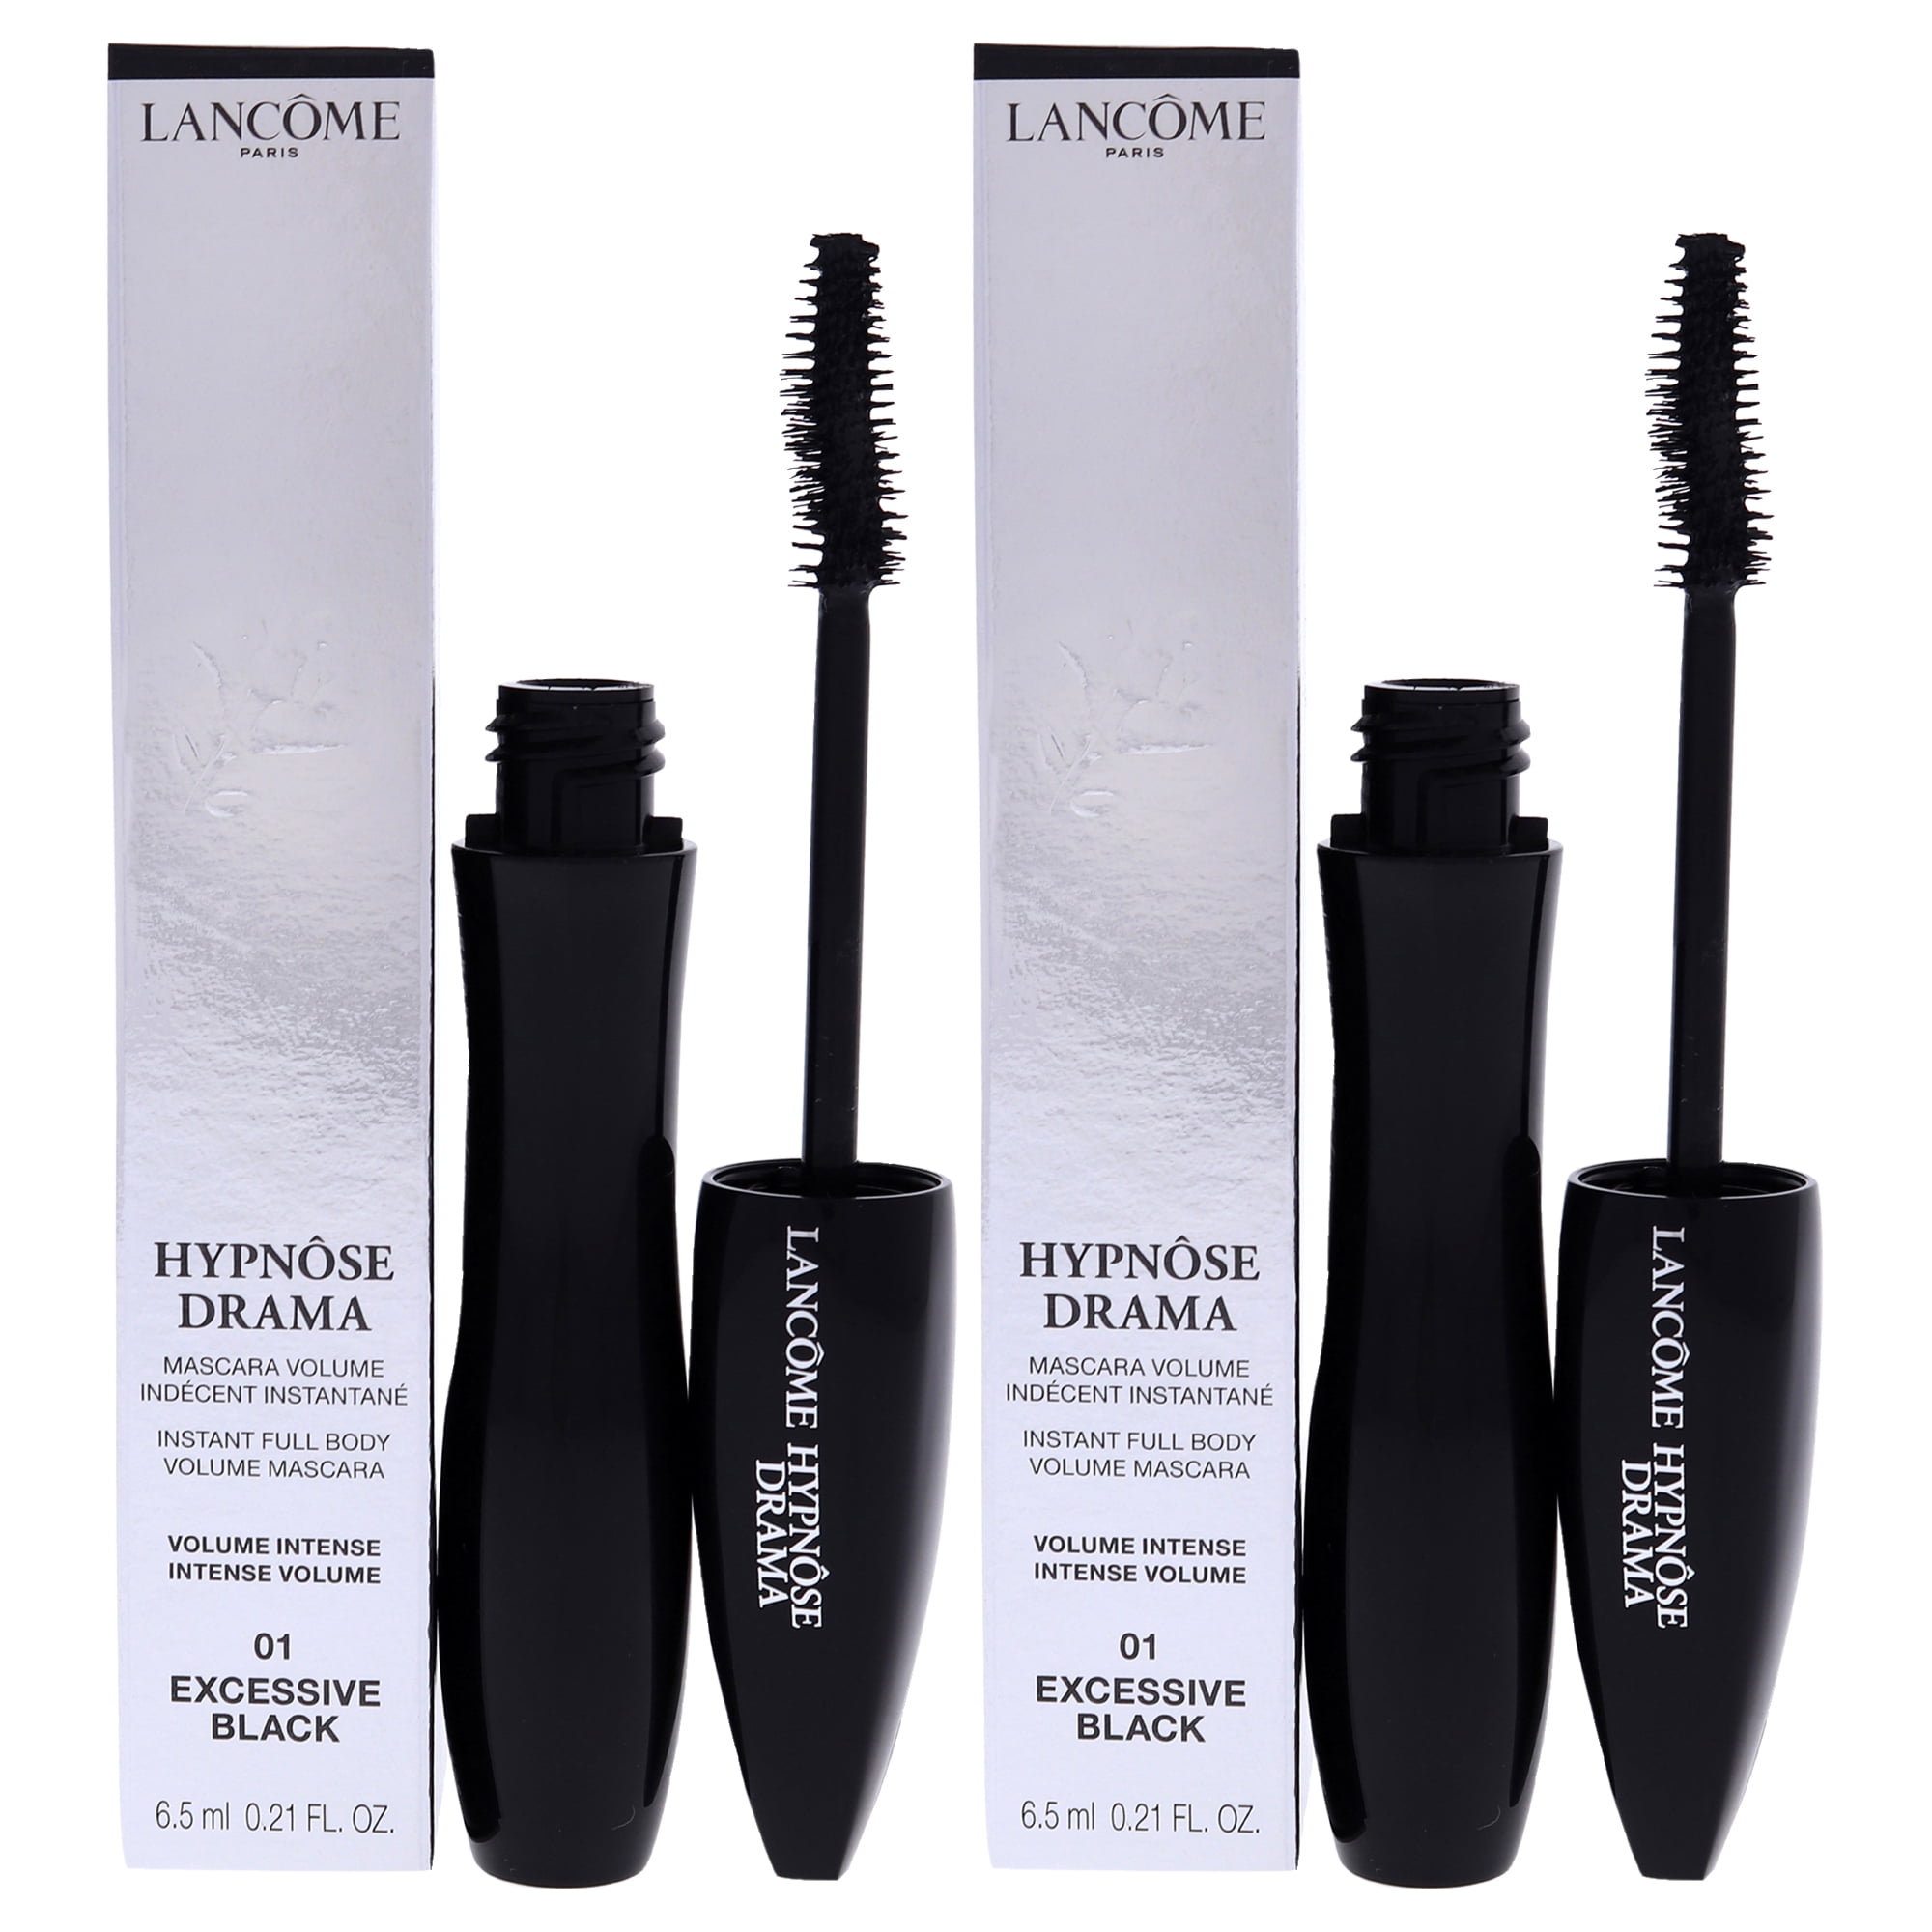 Lancome Hypnose Drama Instant Full Body Volume Mascara - 01 Excessive Black - Pack of 2, 0.21 oz